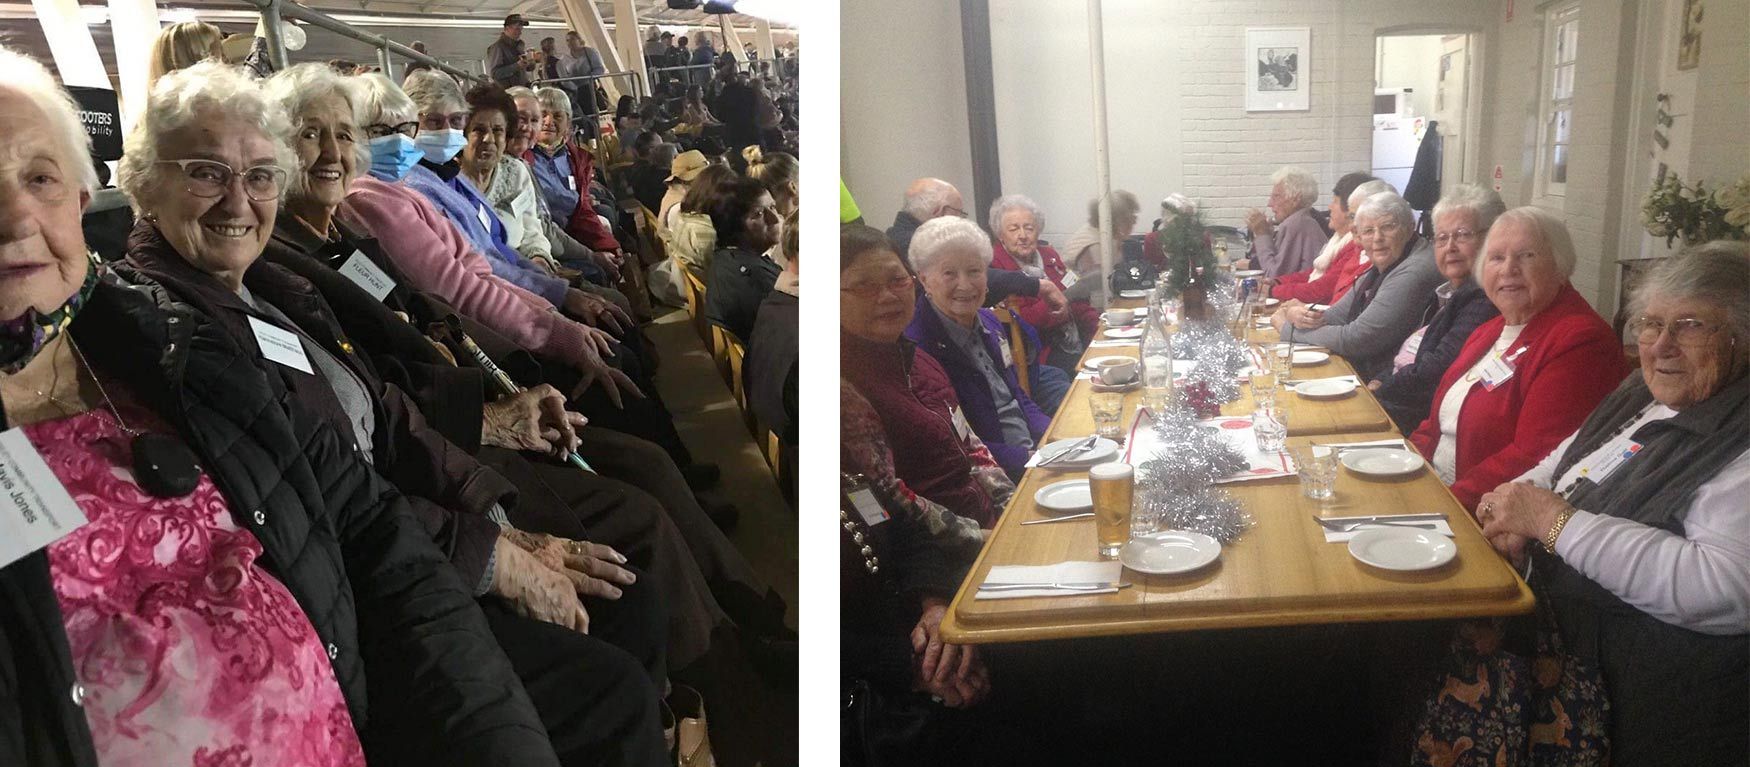 Senior Women Sitting On The Dining Table and  Othe Senior Women  Sitting On The Event — Social Outings for Seniors in Tamworth, NSW